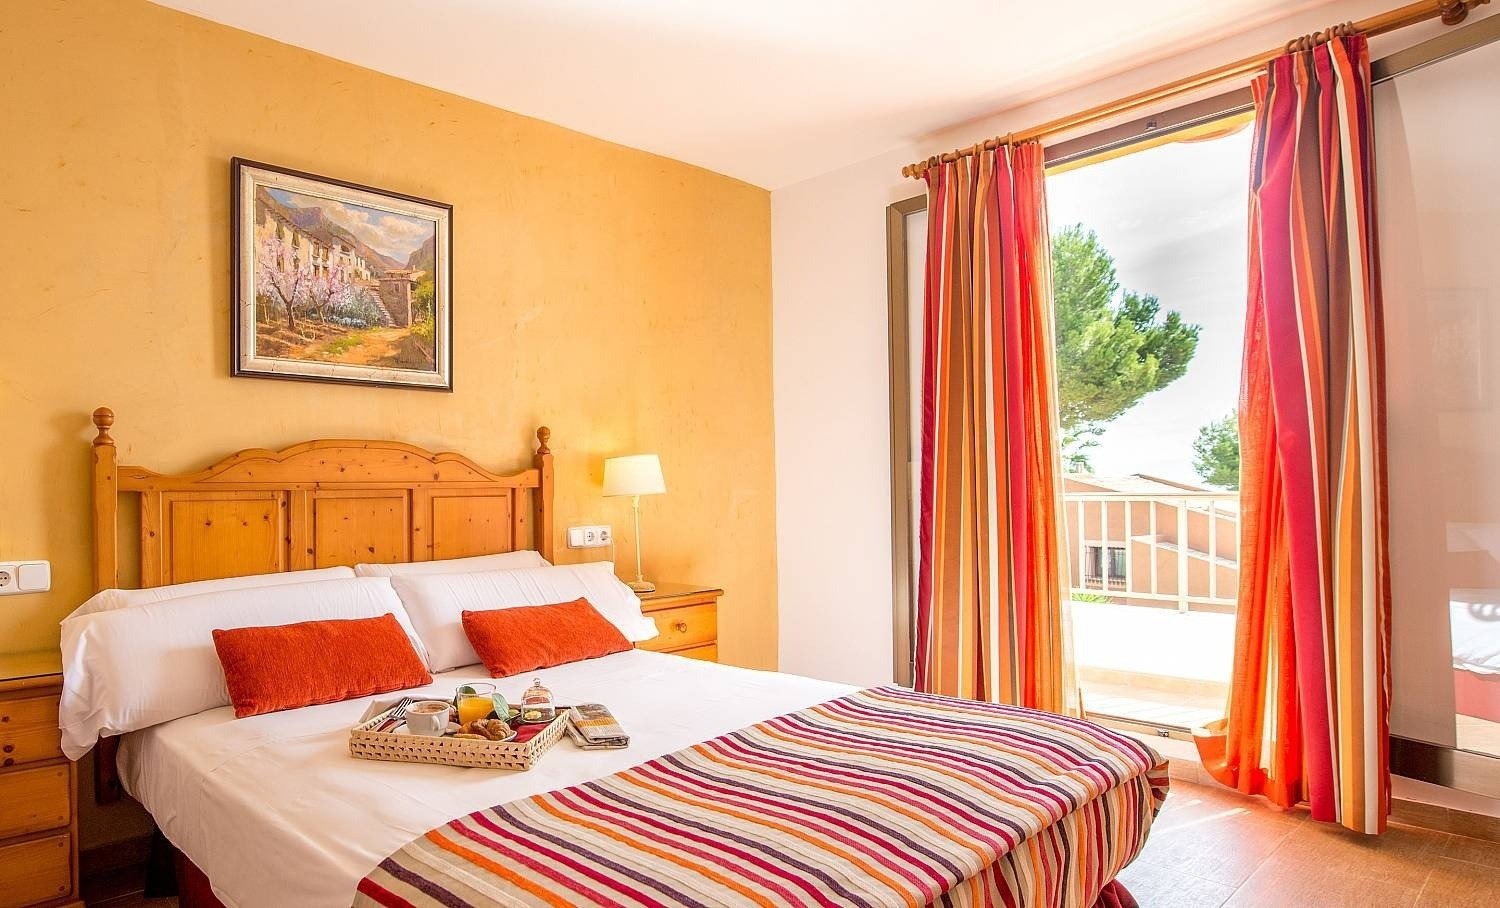 Bedroom with double bed at the Ona Aucanada hotel in the North of Majorca